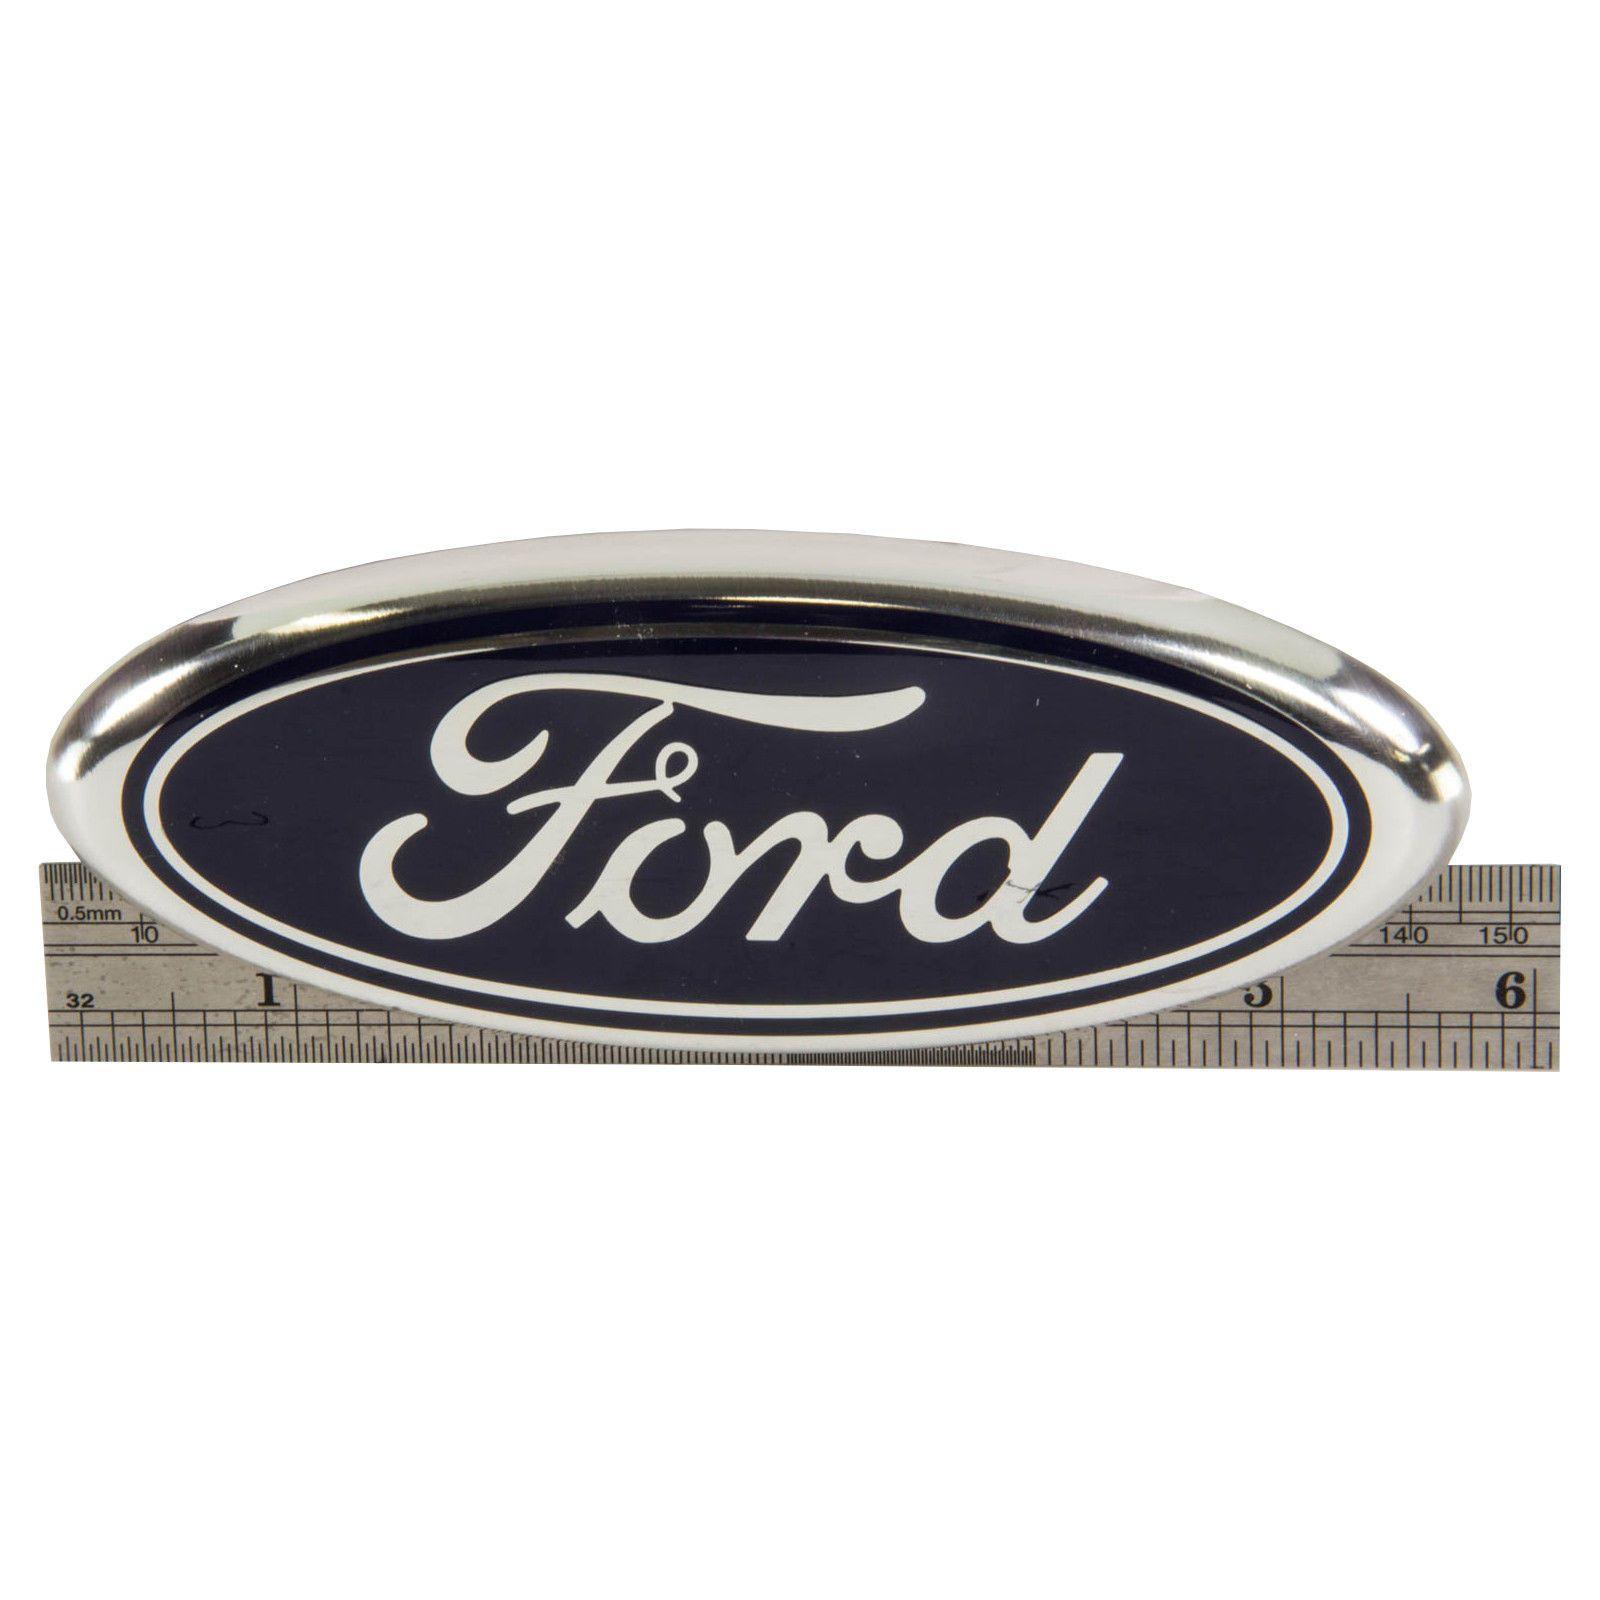 2014 Ford Logo - Awesome OEM NEW 2012 2014 Ford Focus Blue Ford Oval Emblem On Trunk